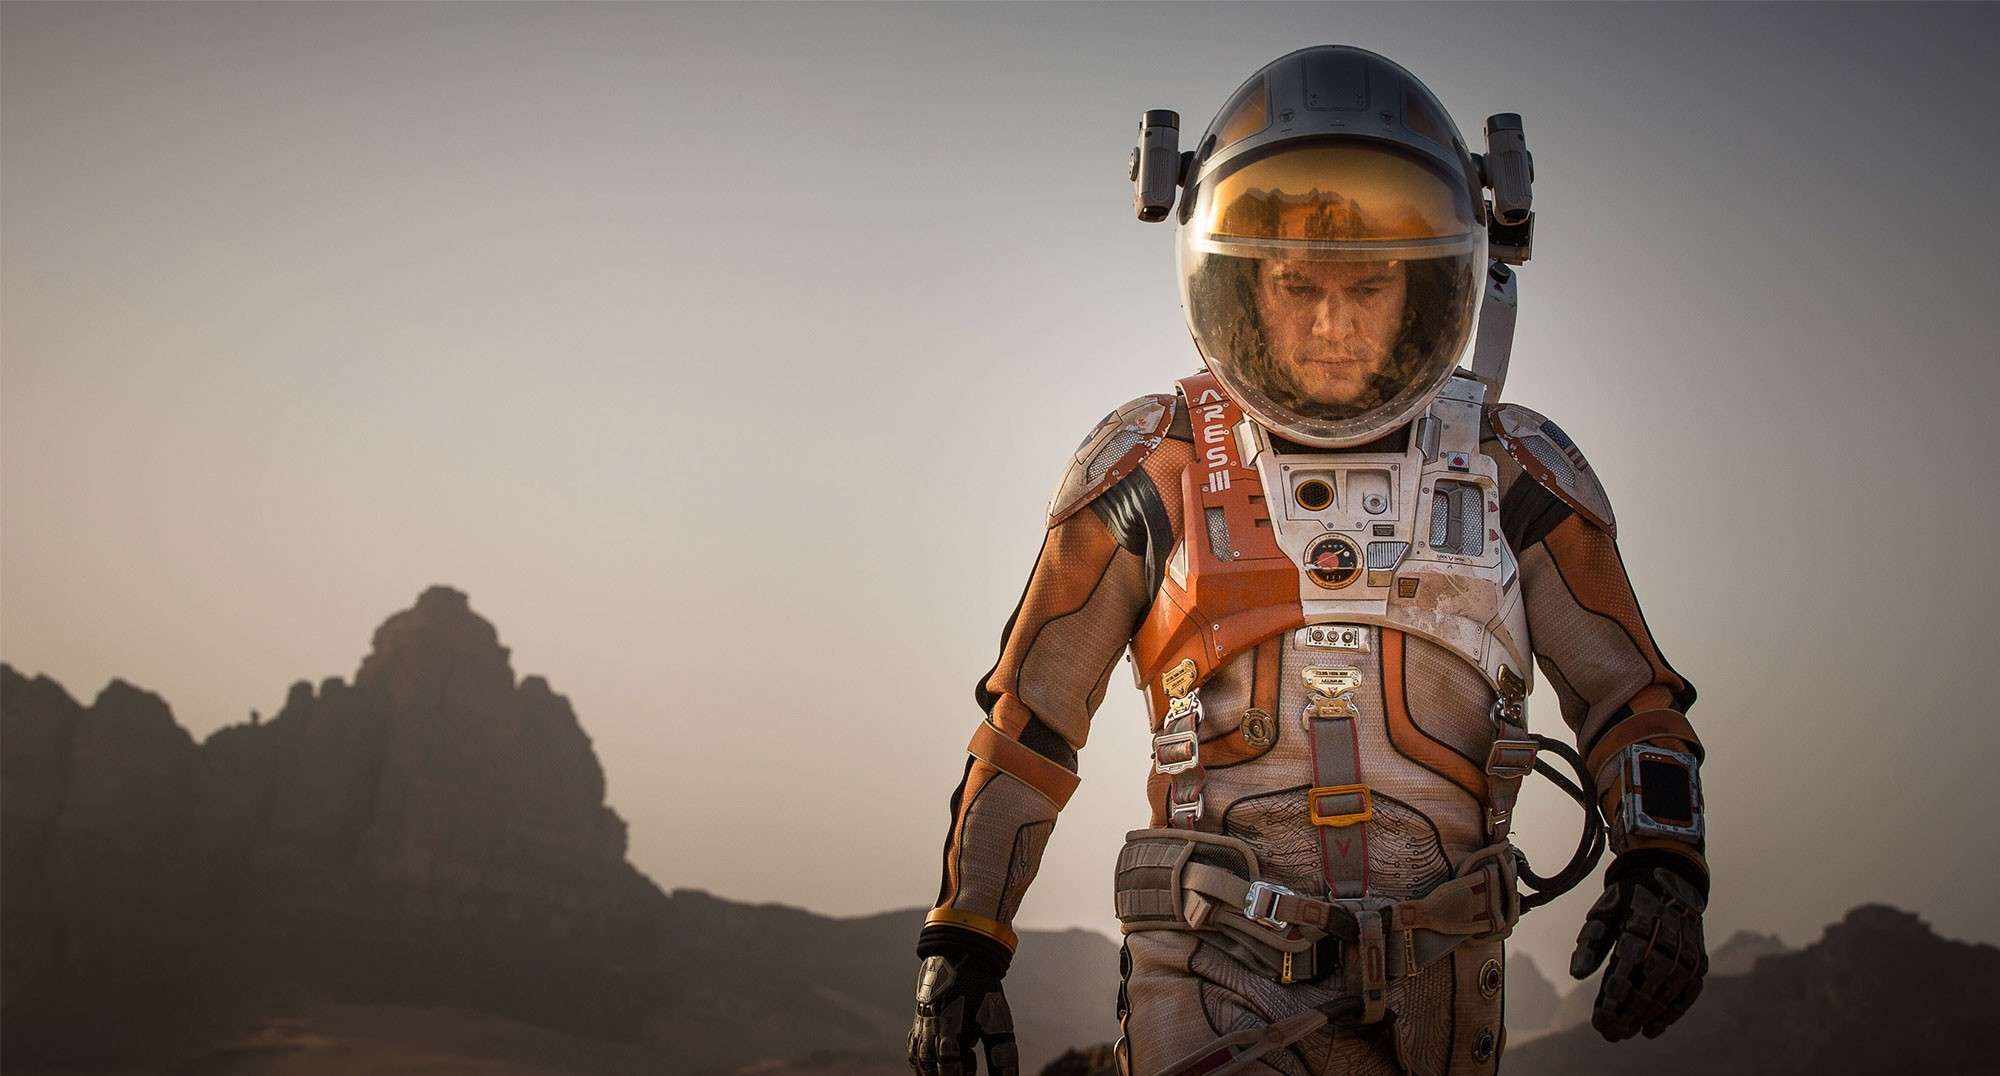 In ‘The Martian’ Trailer, Matt Damon Promises To ‘Science The S**t Out Of This’